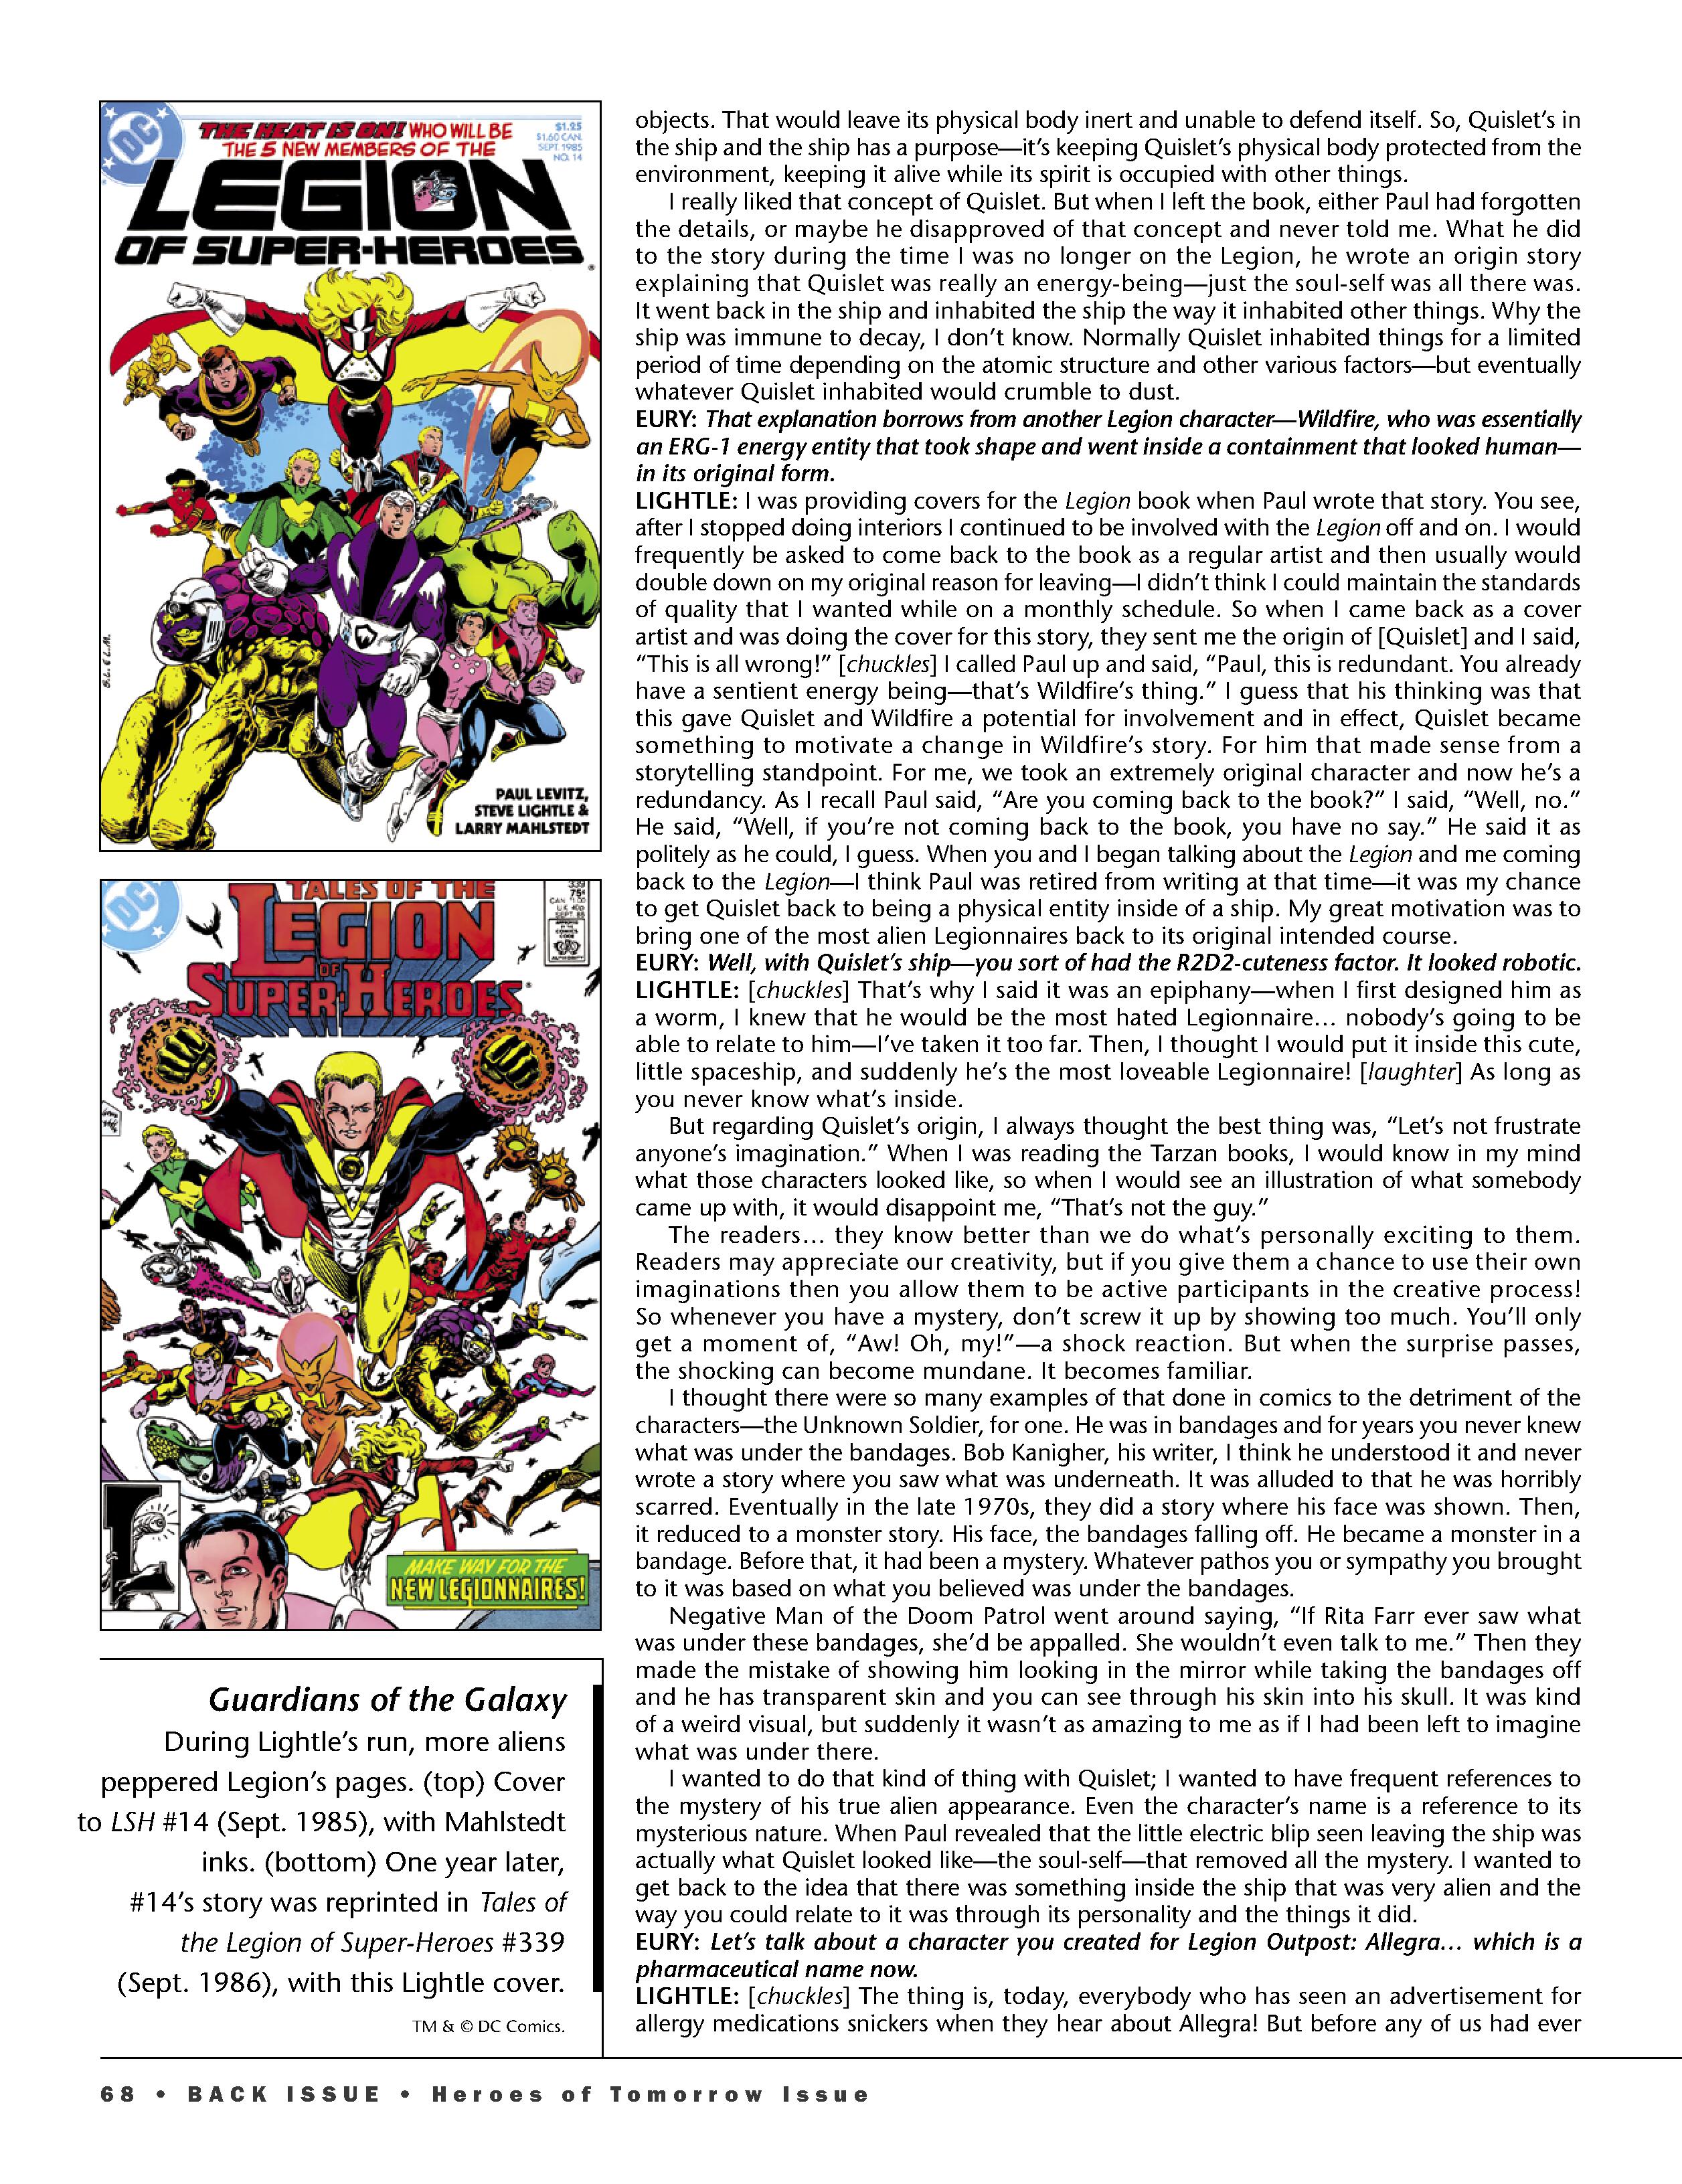 Read online Back Issue comic -  Issue #120 - 70